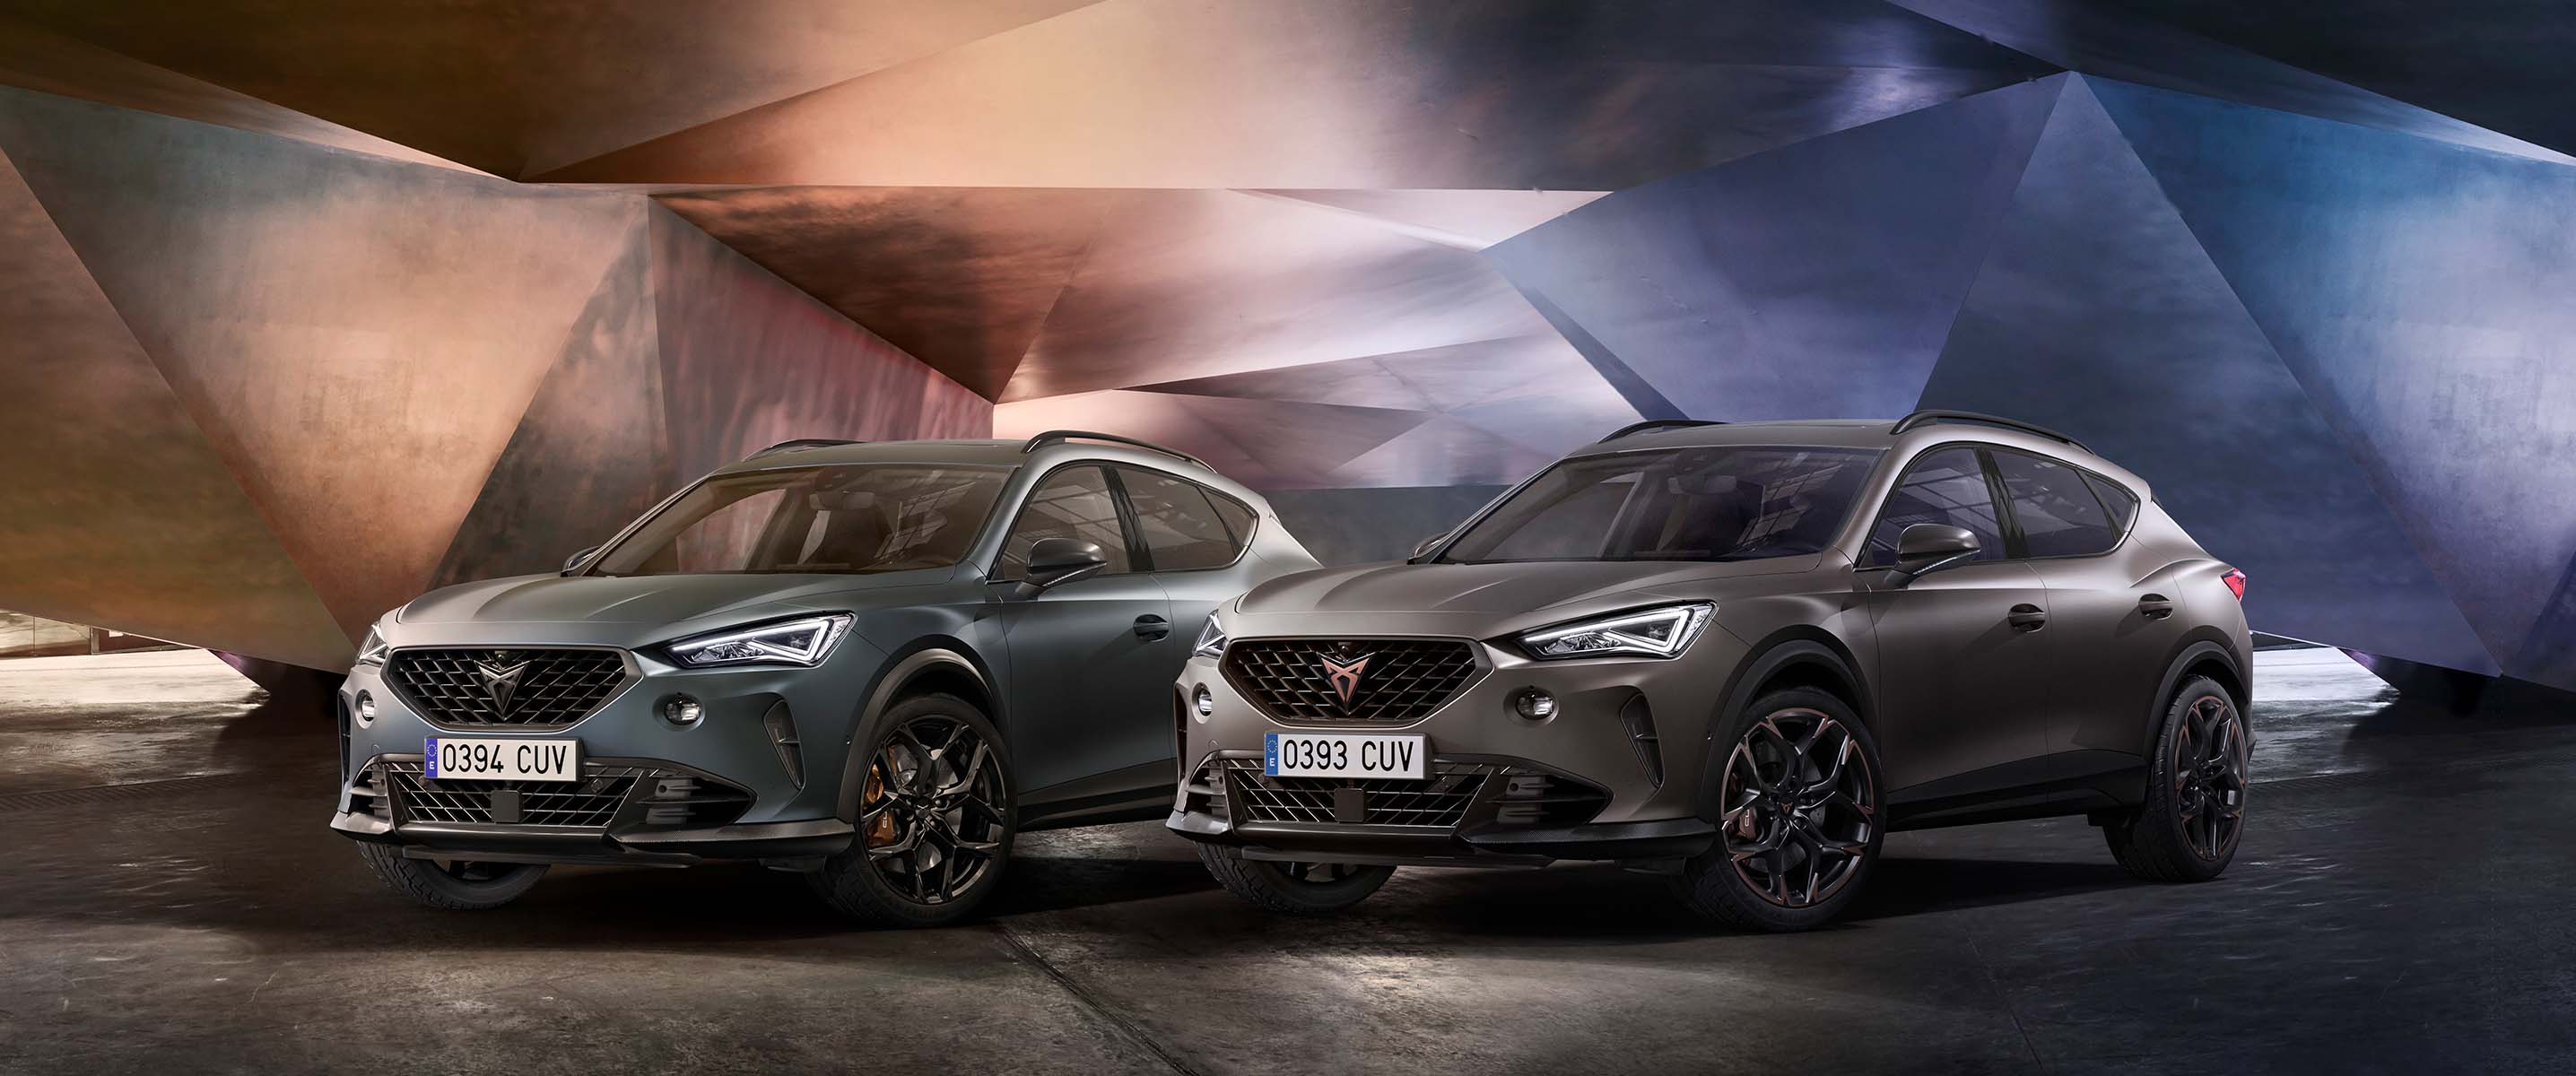 CUPRA Formentor VZ5 models in Century Bronze and Enceladus Grey - Special Limited Editions